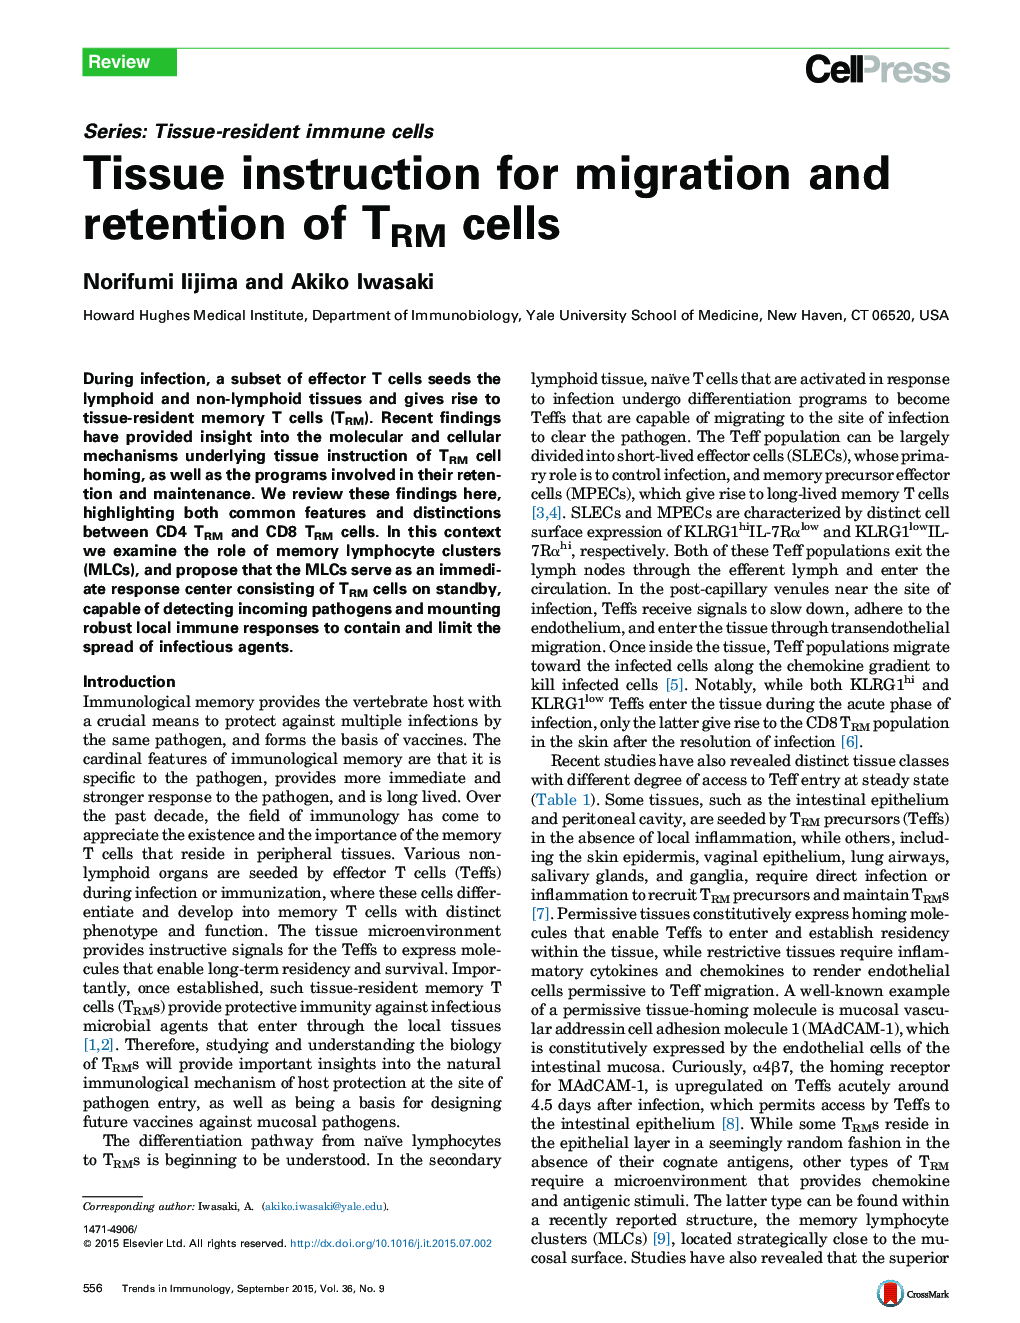 Tissue instruction for migration and retention of TRM cells